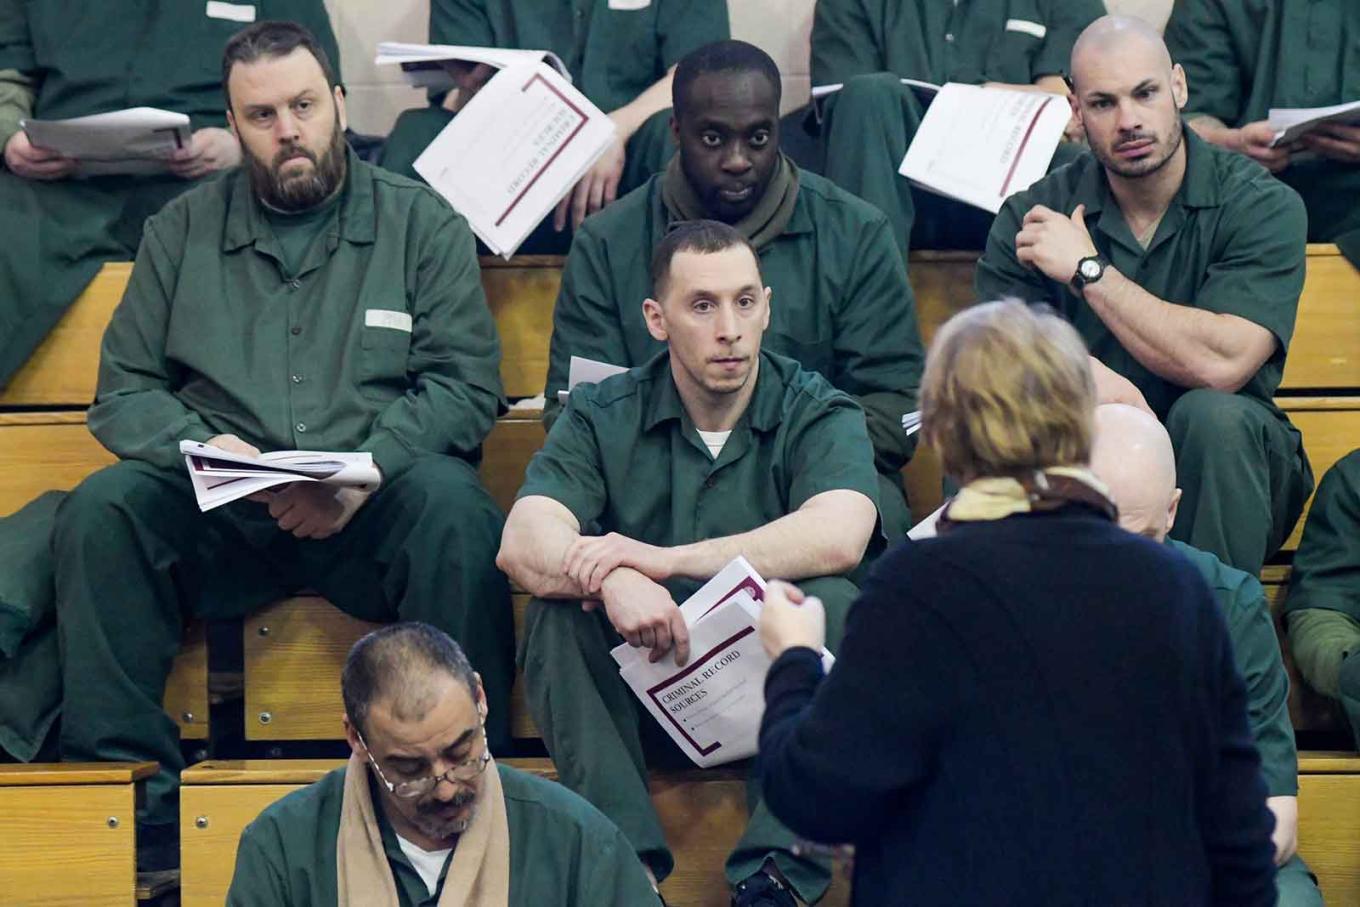 Inmates at Cayuga Correctional facility listen with great focus to Esta Bigler speak about their rights